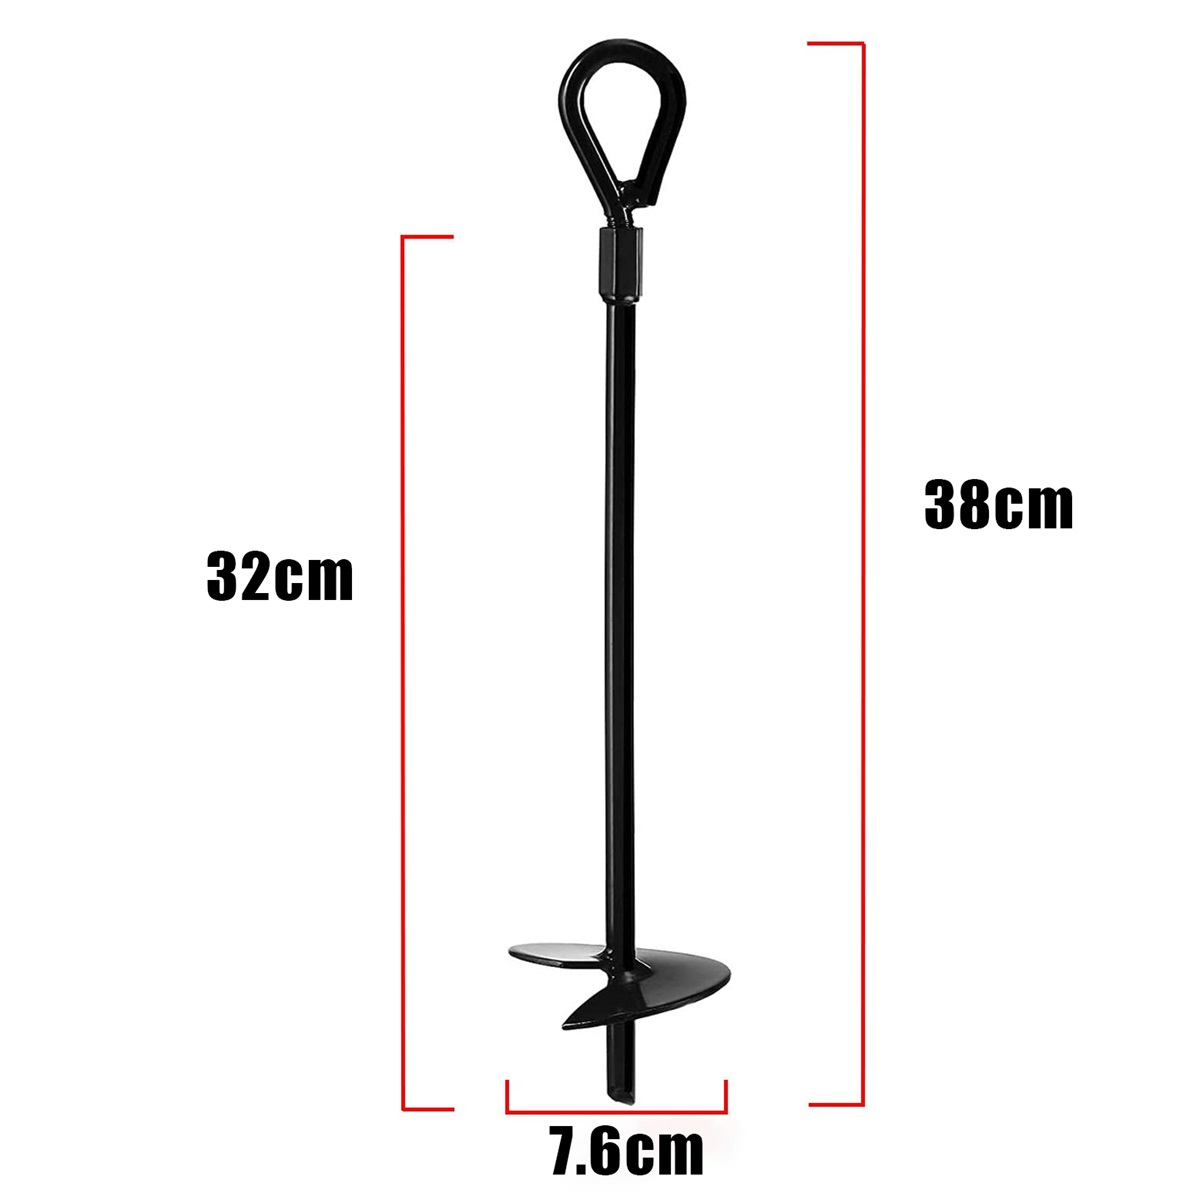 380mm-Heavy-Earth-Ground-Anchor-Auger-Drill-for-Scamping-Tent-Canopies-Car-Ports-1856727-4